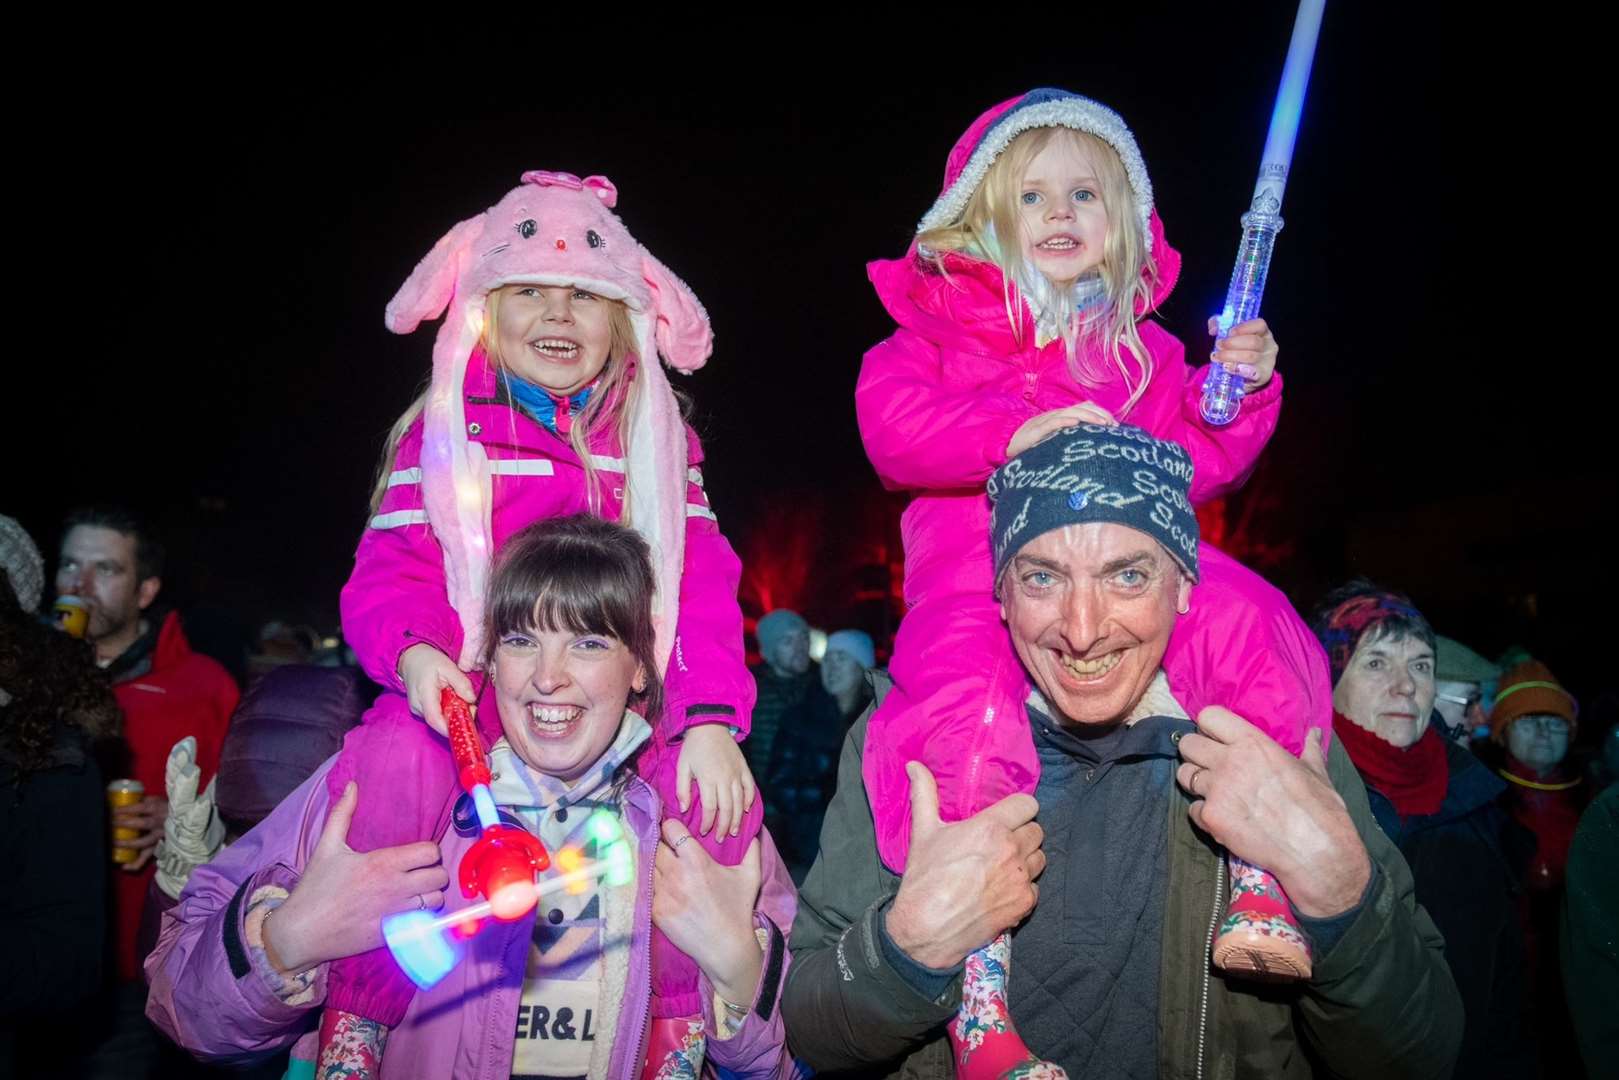 With tickets limited to 5000, this was a family -friendly event. Picture: Callum MAckay.